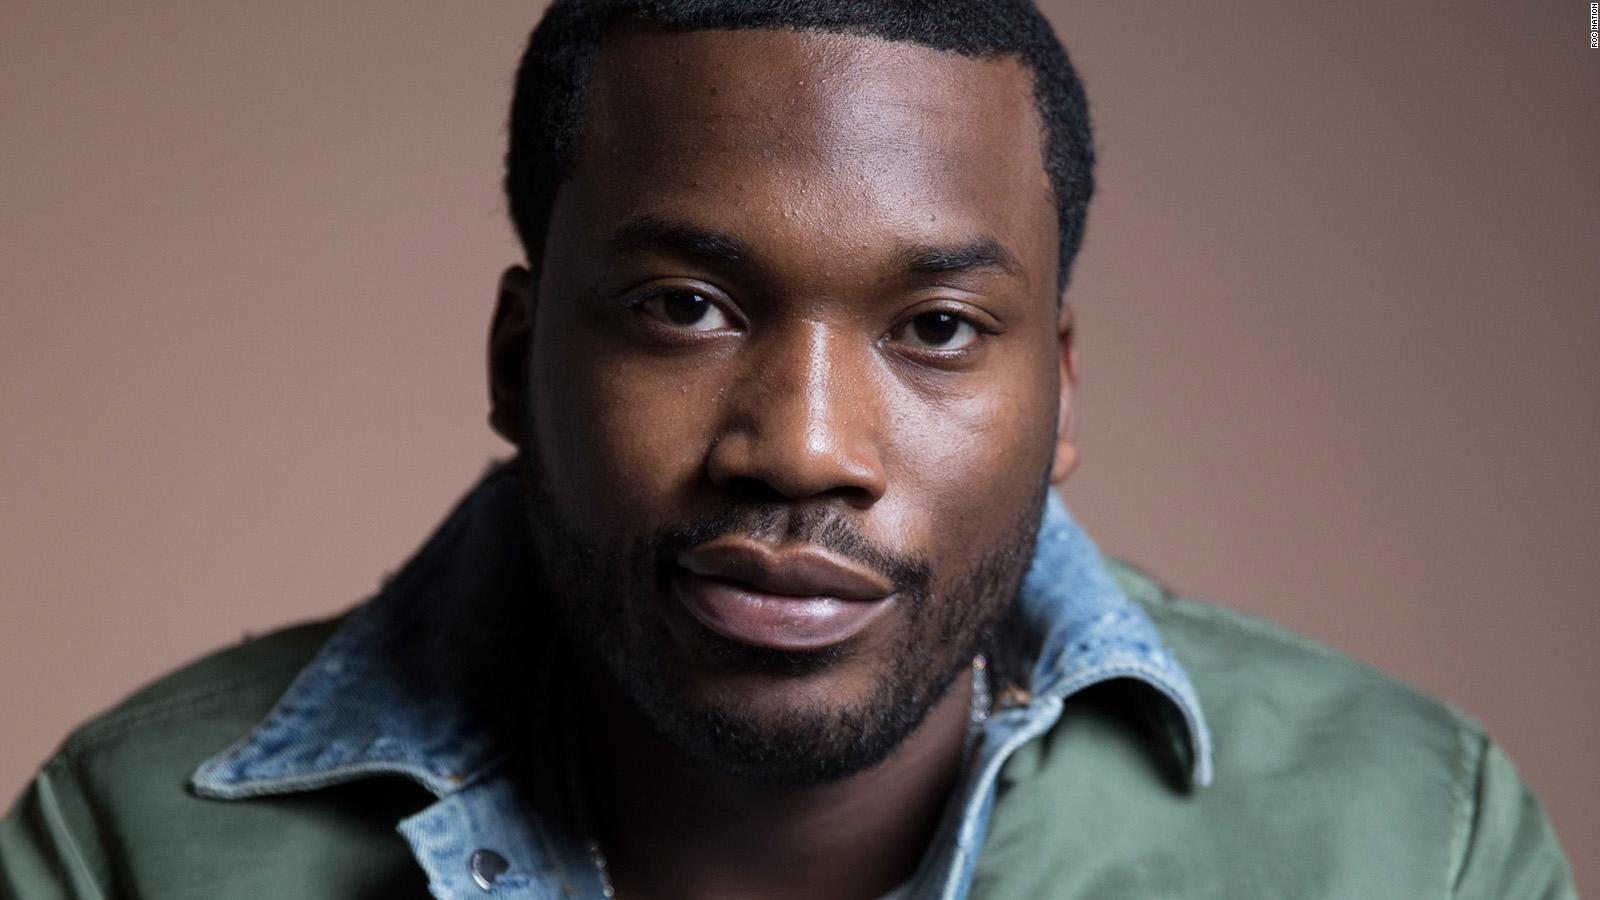 Meek Mill speaks from prison for the first time